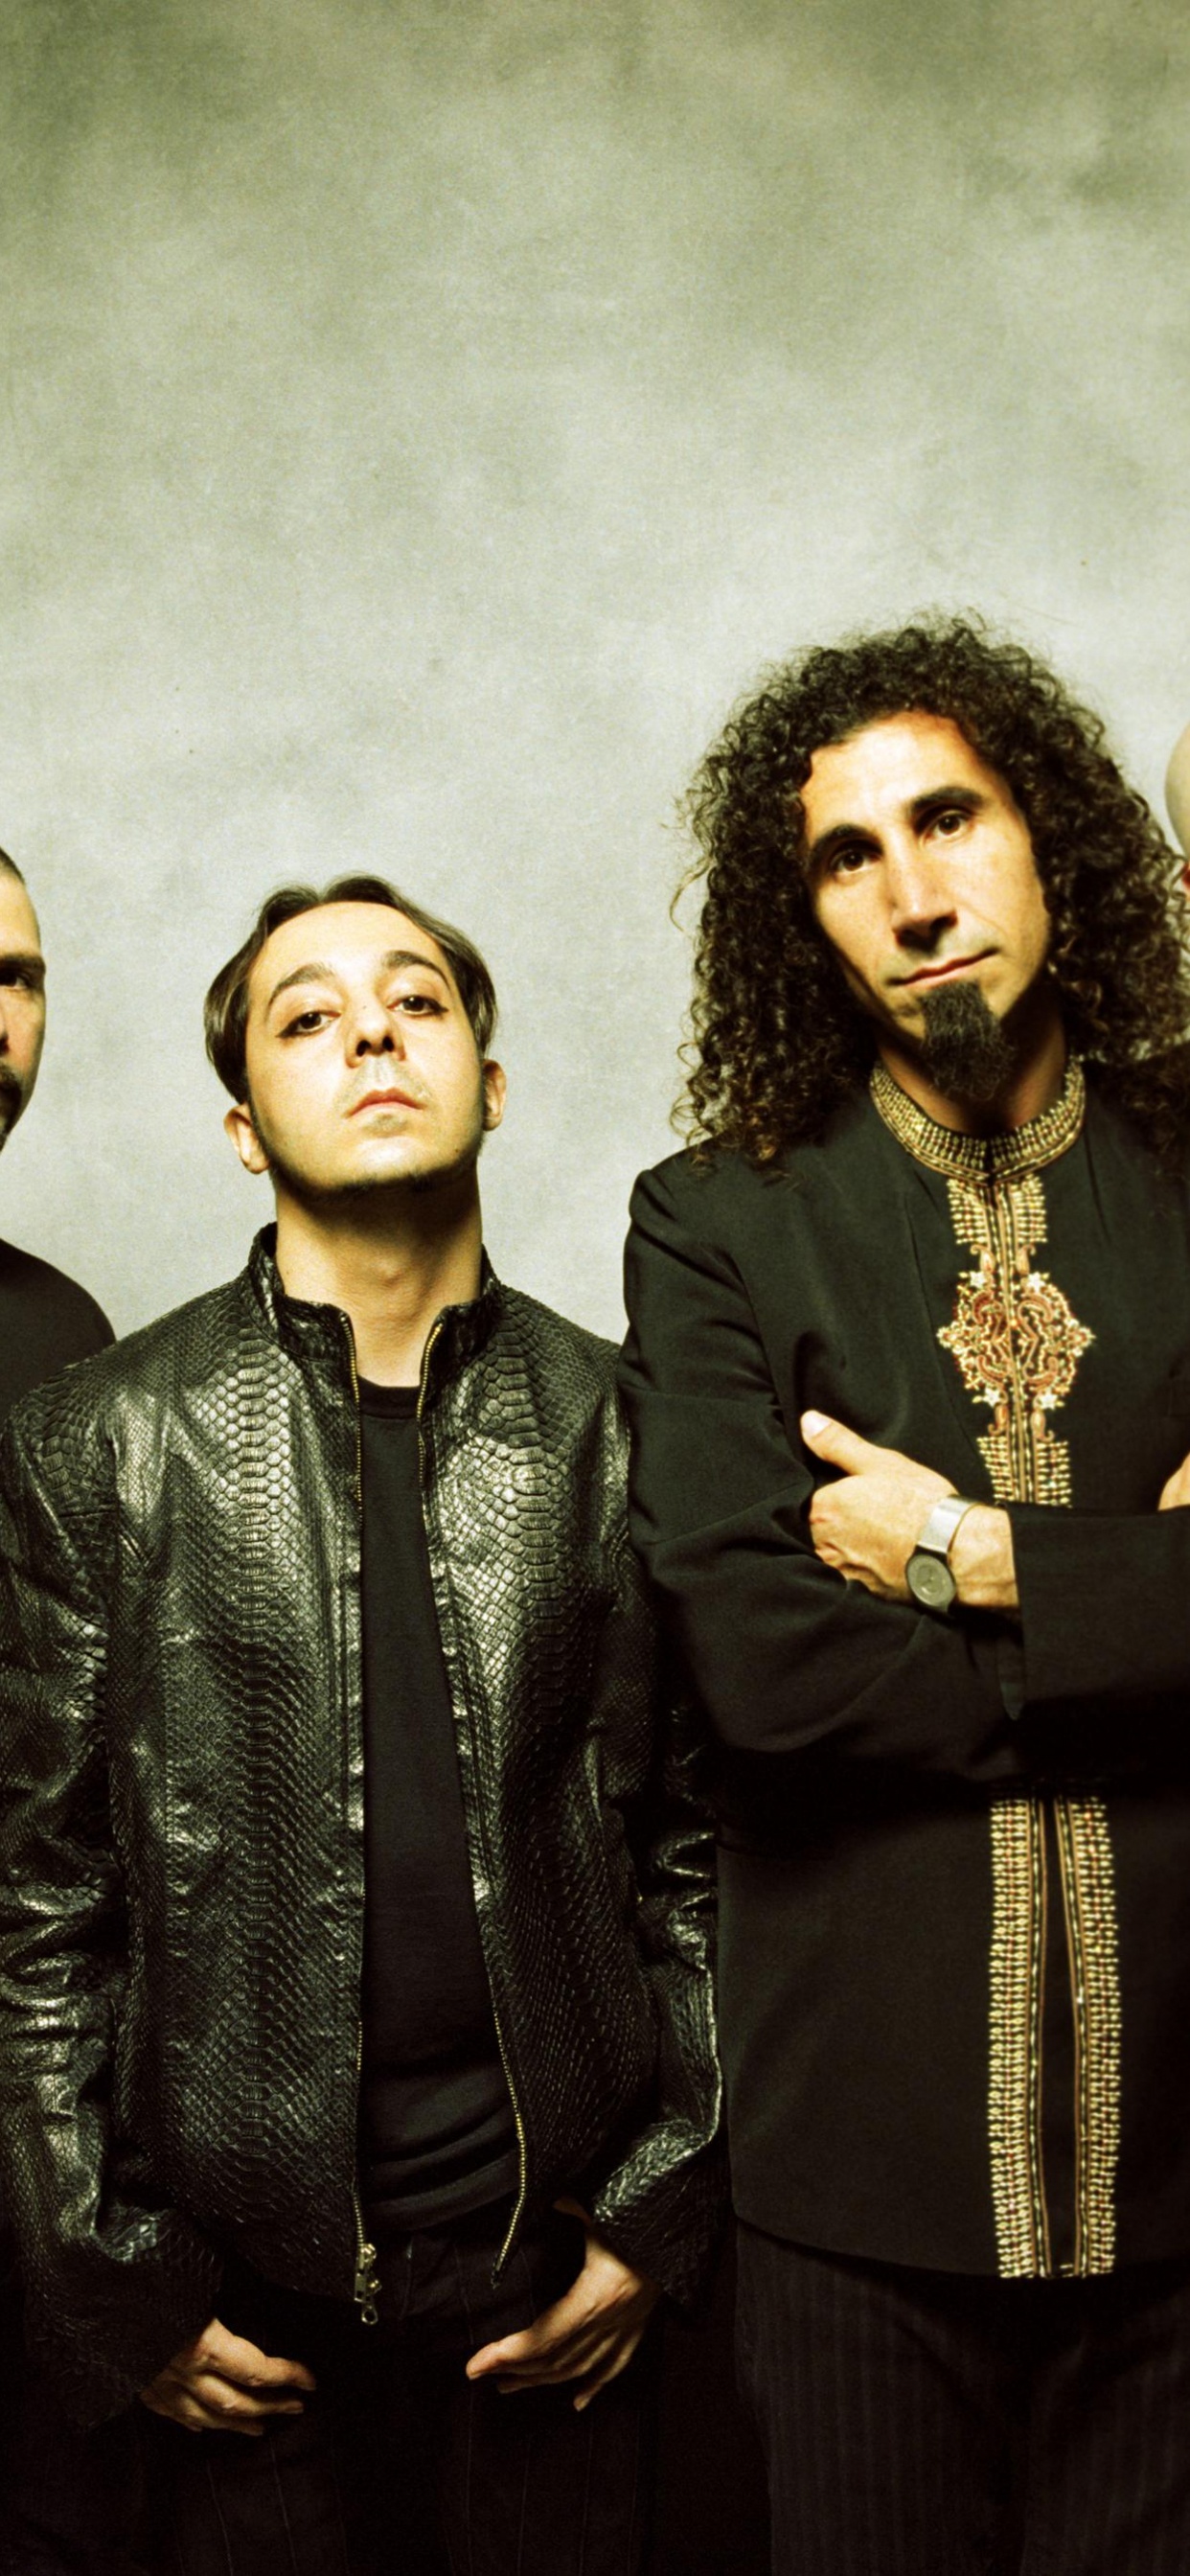 System Of A Down, Heavy Metal, Social Group, Fun, Event. Wallpaper in 1242x2688 Resolution